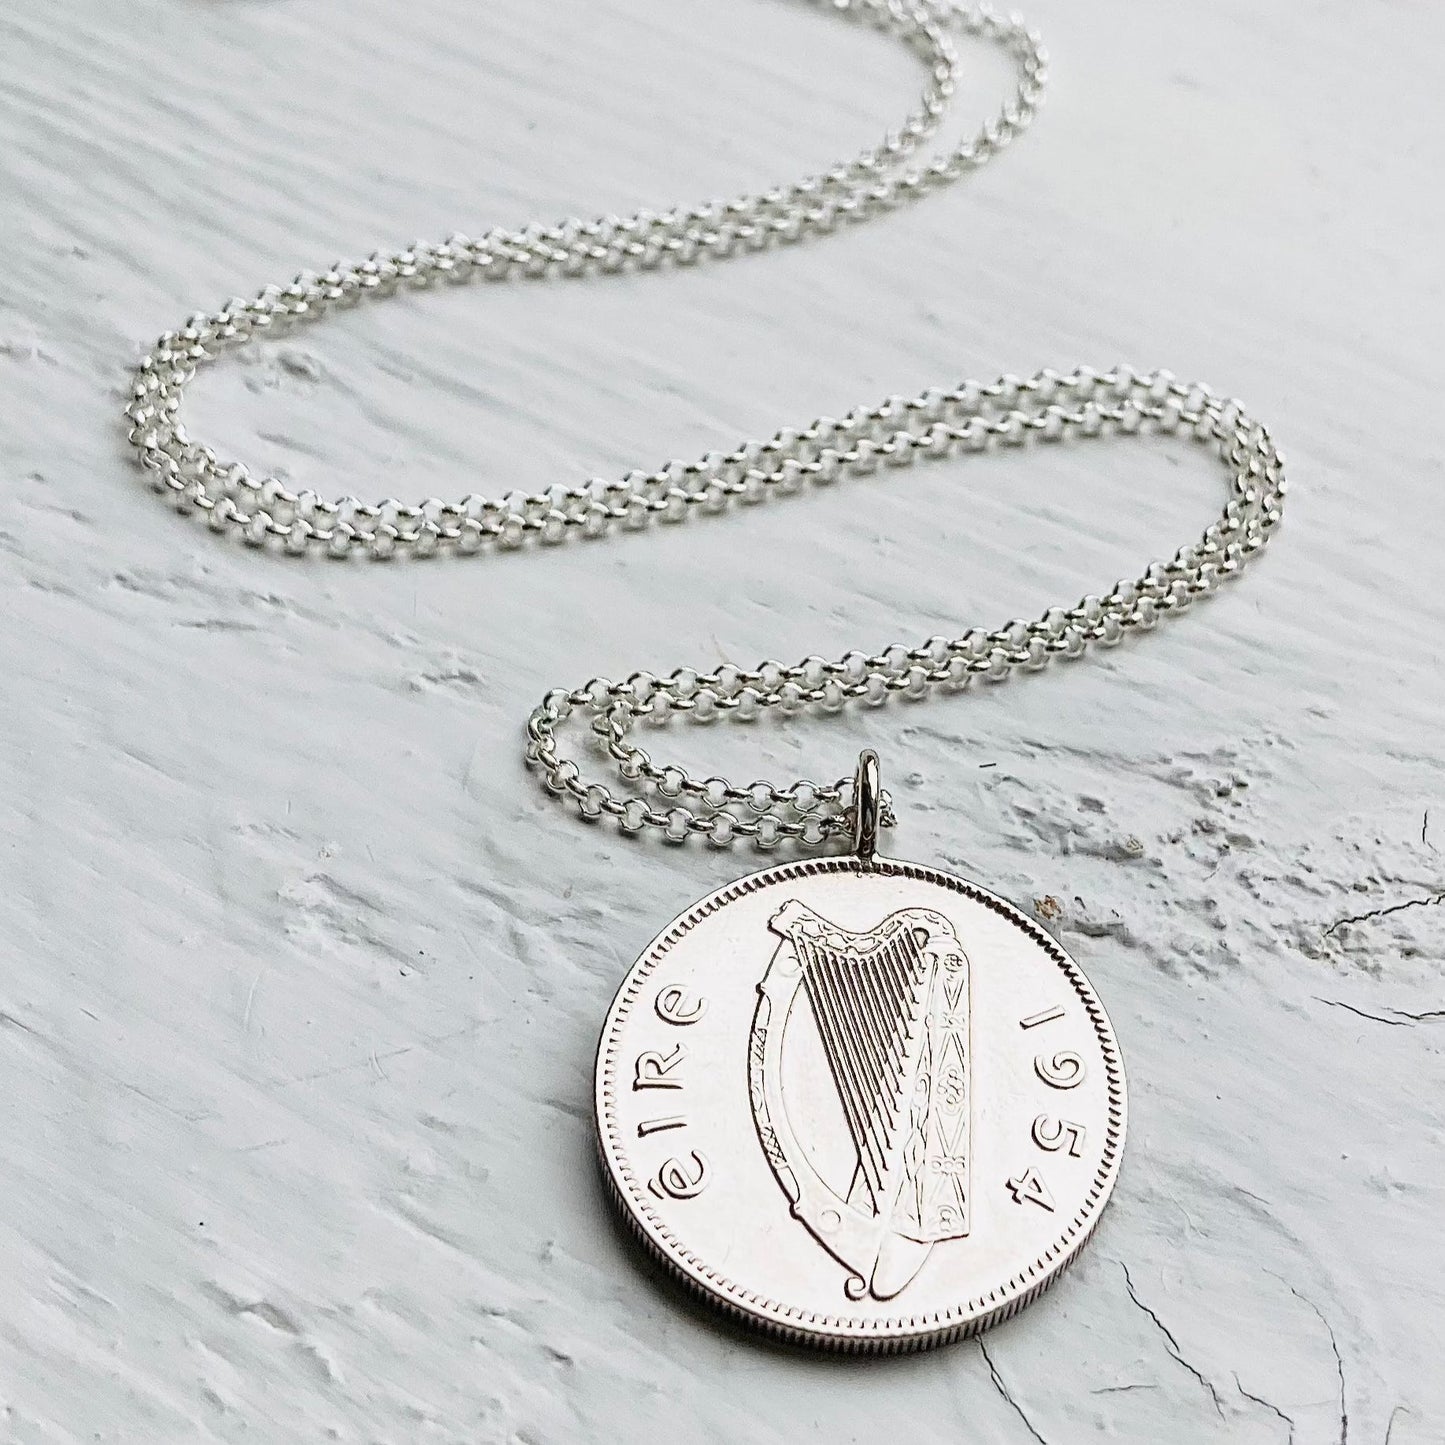 1954 Harp Silver Coin Necklace - Celtic 70th birthday jewellery for men and women by Prenoa in Stamford UK.